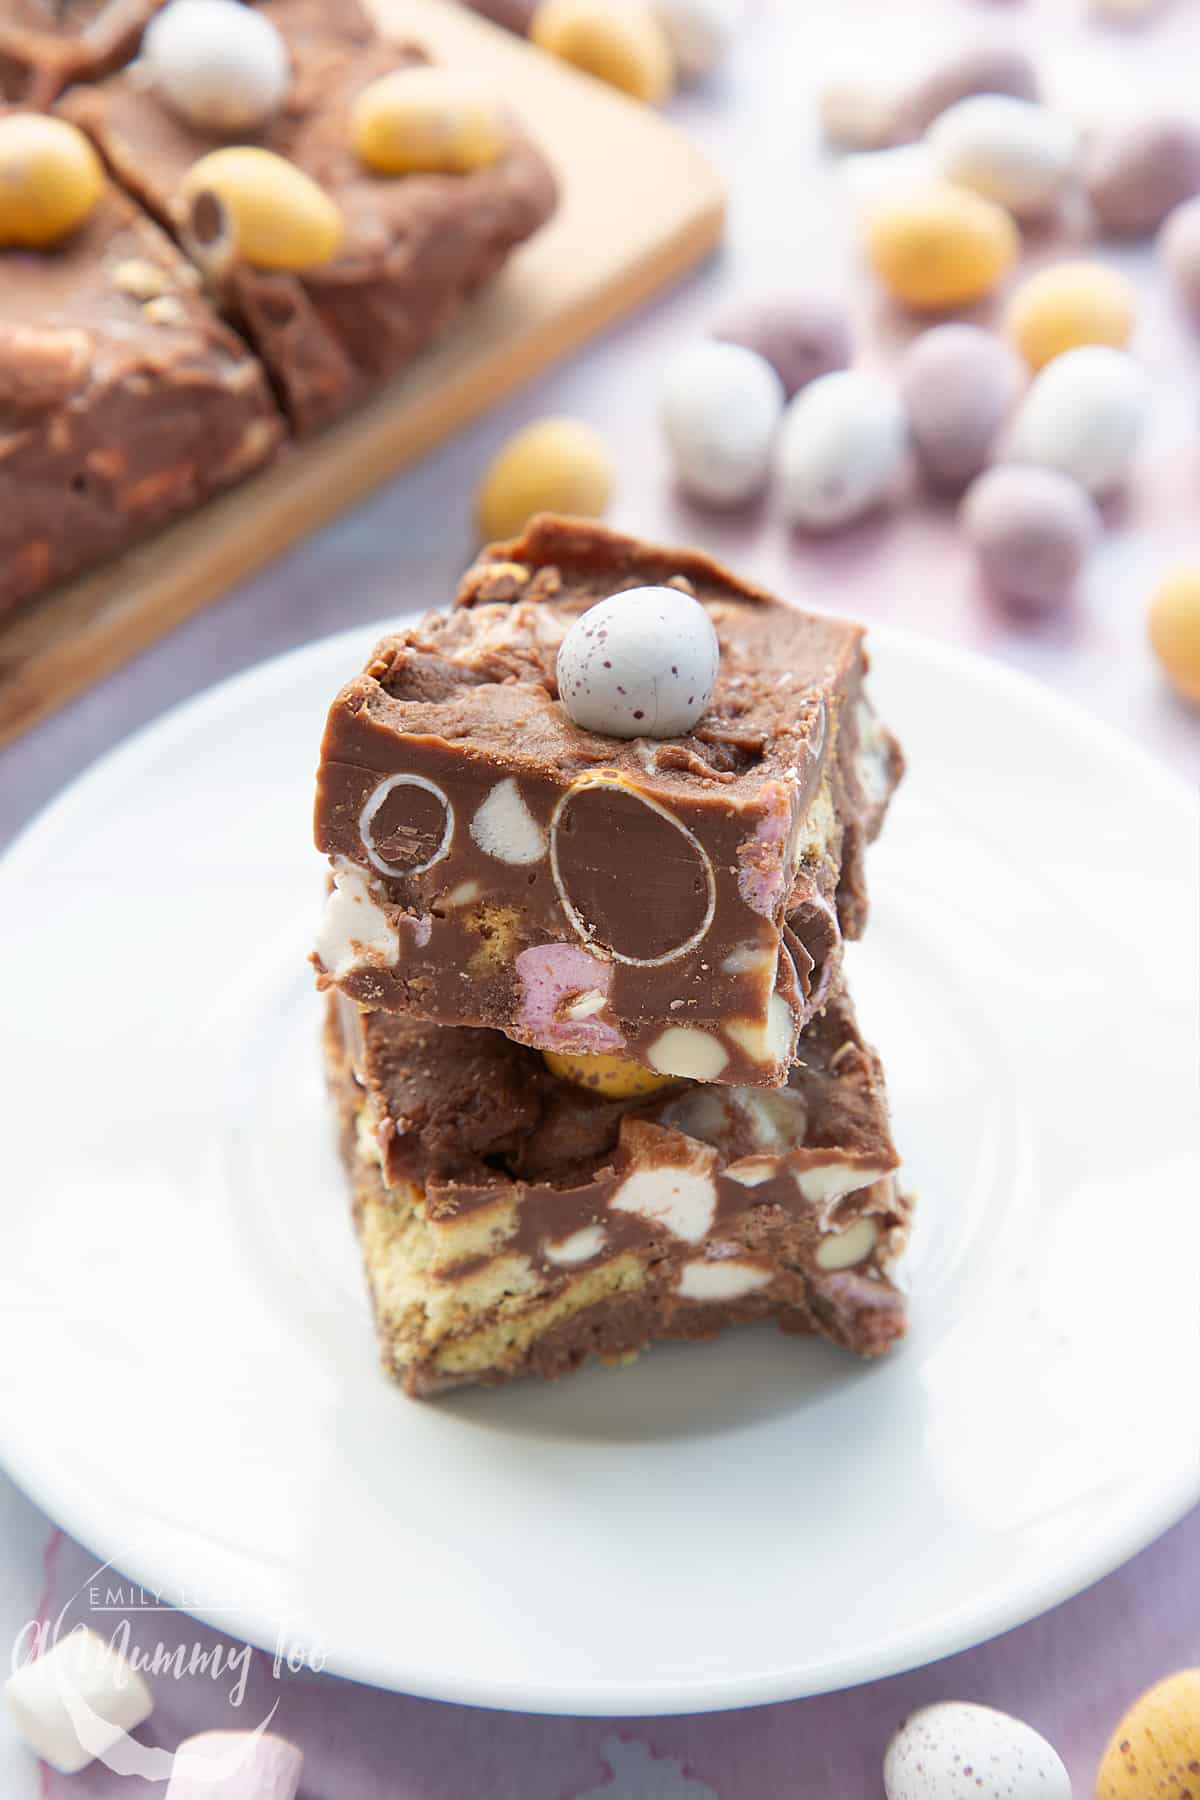 Two squares of Mini Egg rocky road stacked on a small white plate. More rocky road is in the background.